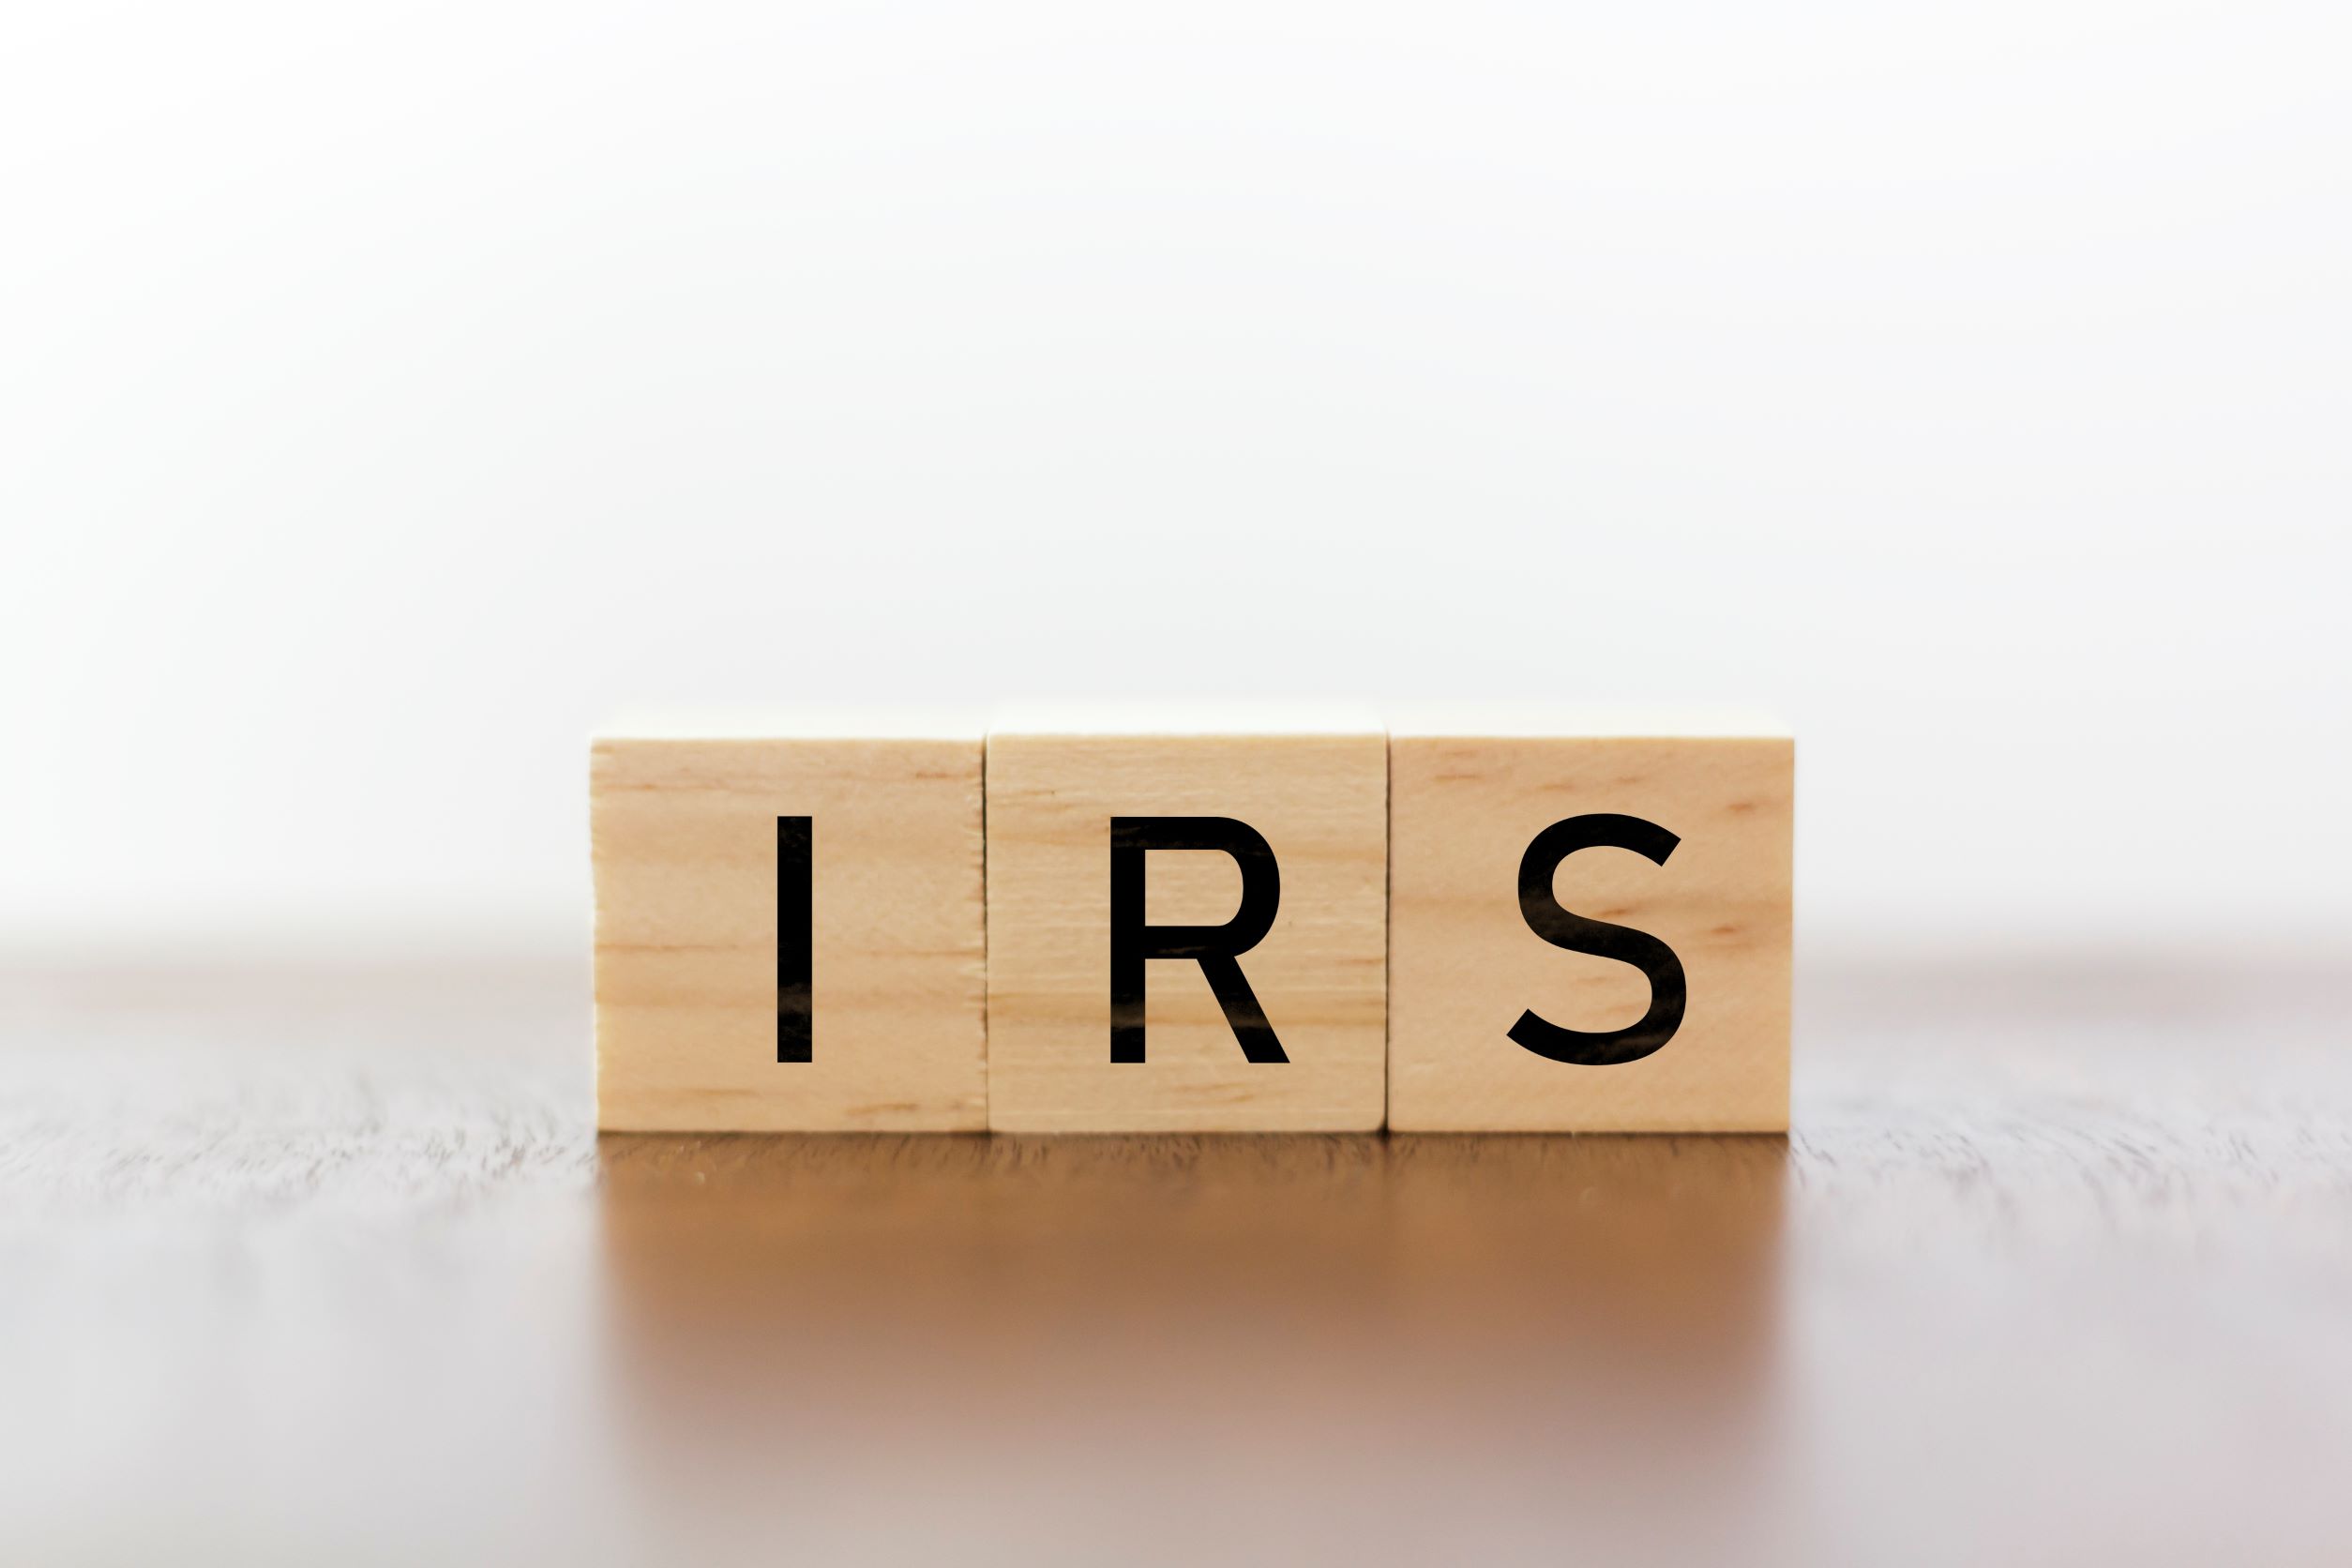 Have you received an IRS notice?